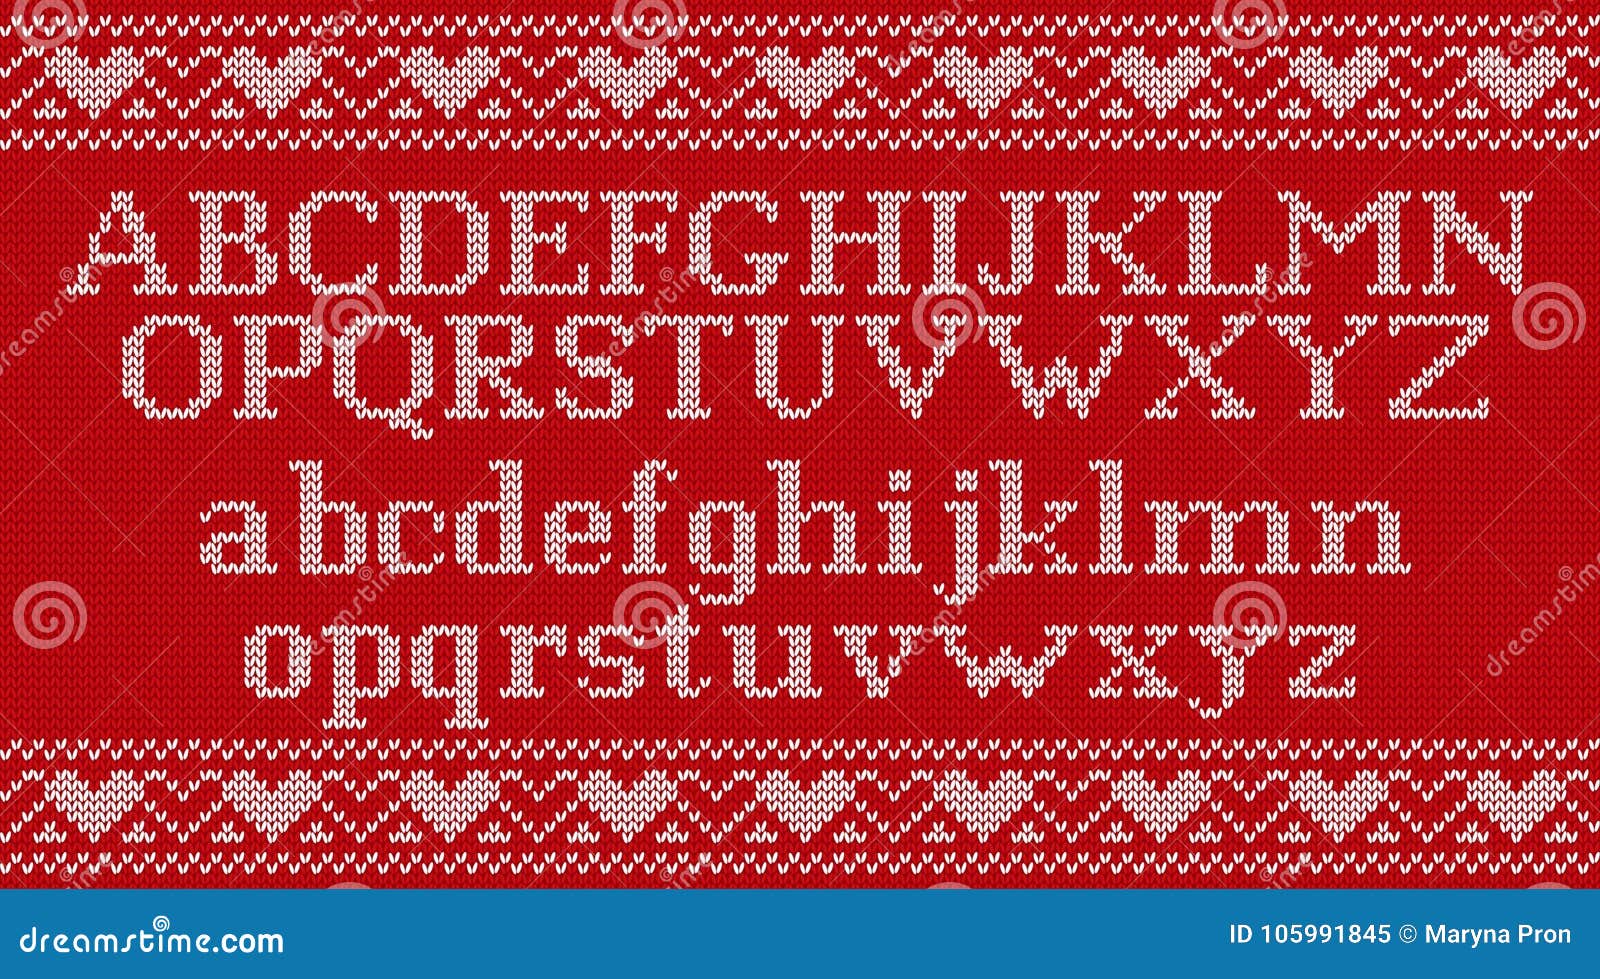 Knit Font On Christmas Knitted Background Vector Illustration Stock Vector Illustration Of Jumper Collection 105991845